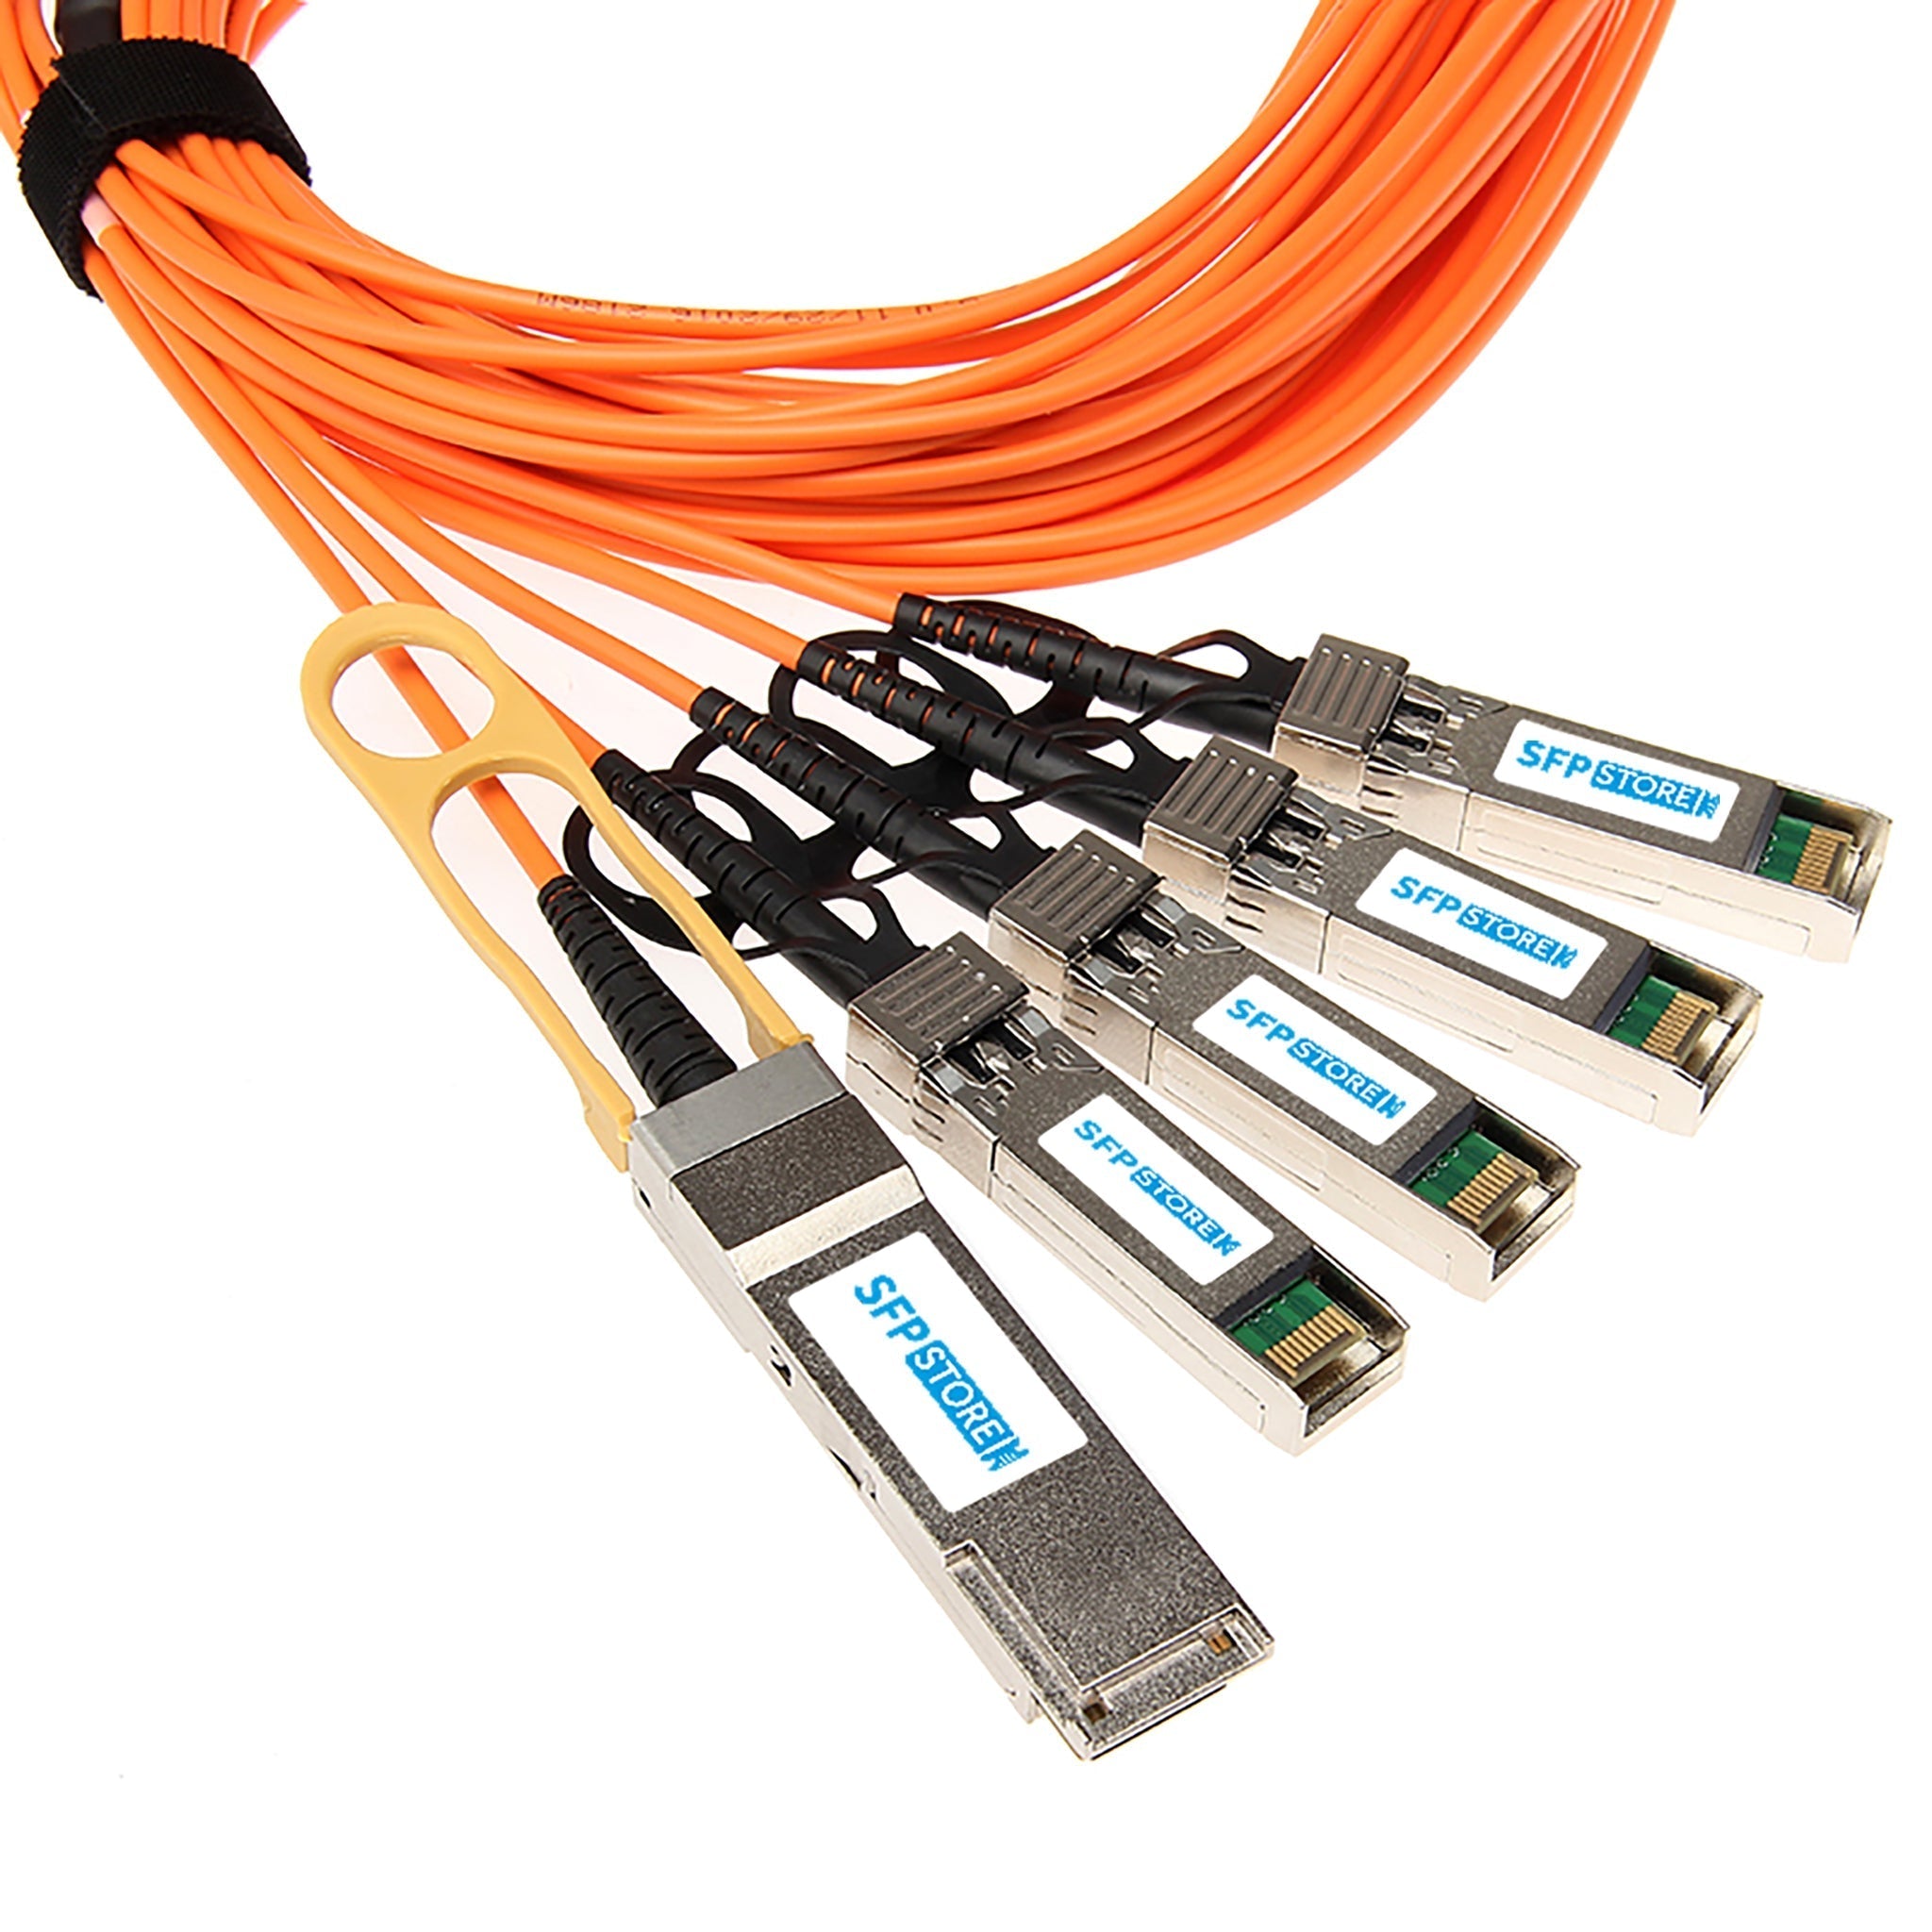 40G-QSFP-4SFP-AOC-0301-C - 3m Brocade/Ruckus Compatible 40G QSFP+ to 4 x 10G SFP+ Active Optical Cable